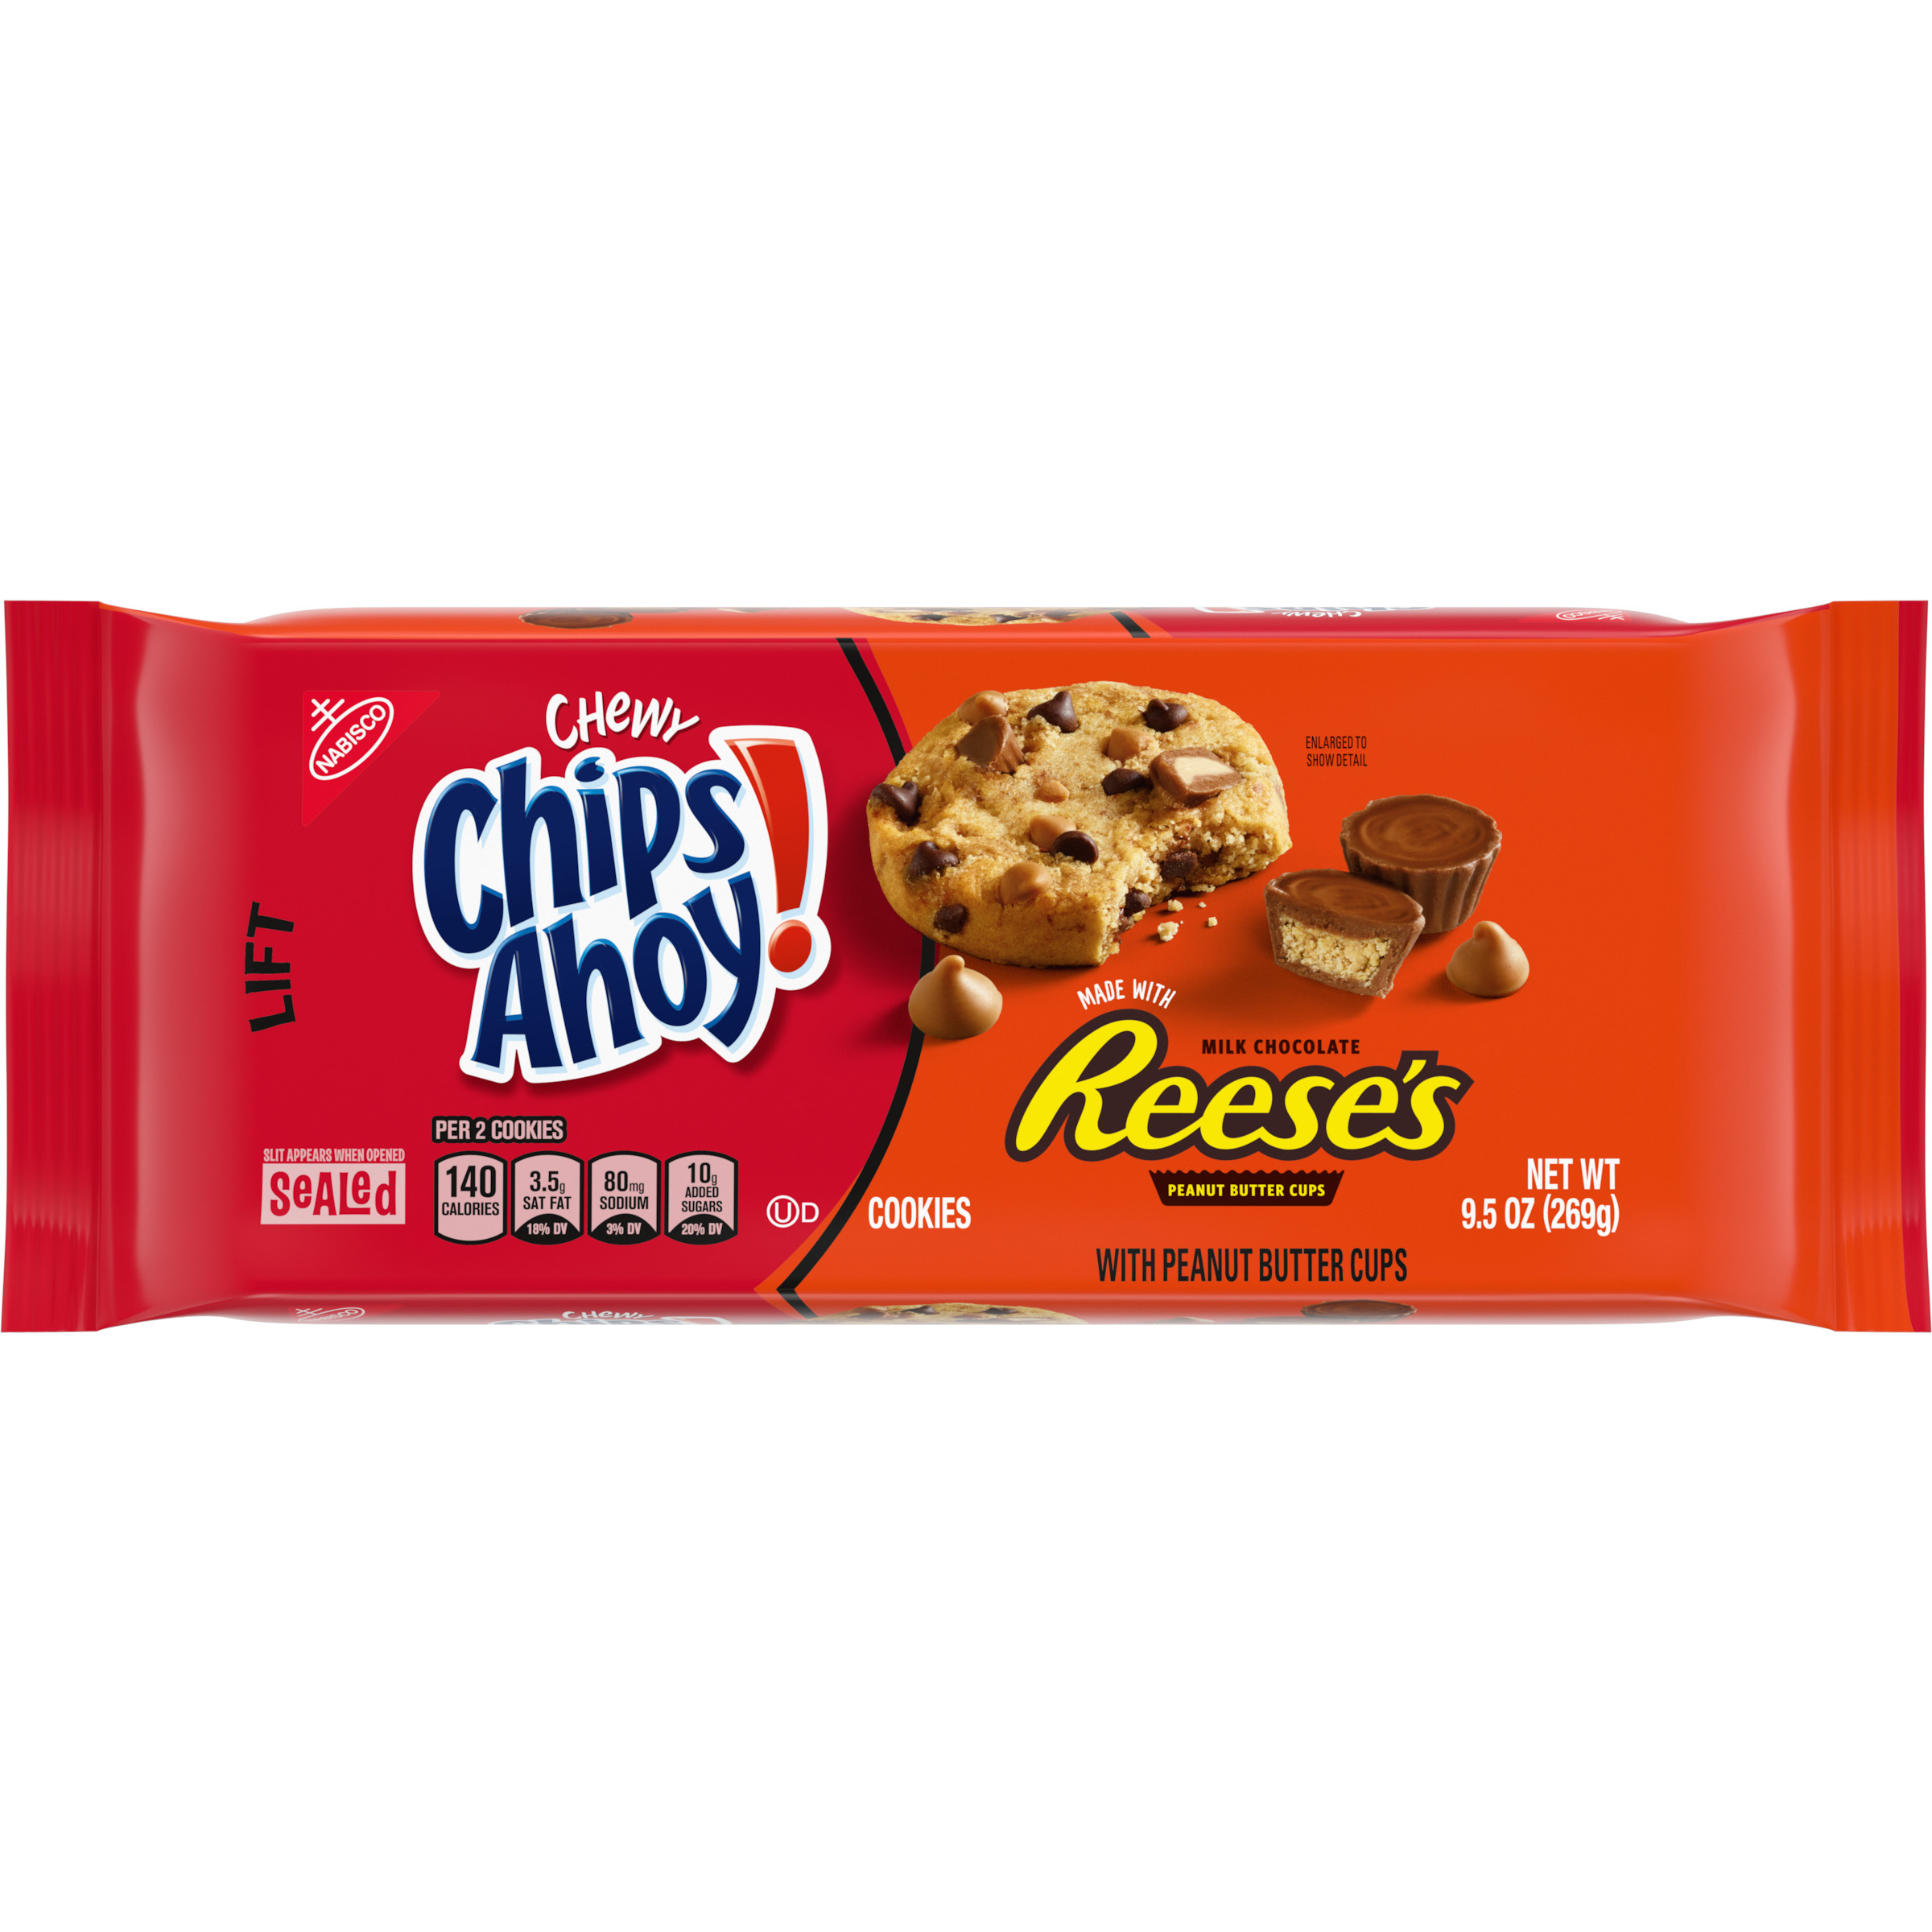 CHIPS AHOY! Chewy Chocolate Chip Cookies with Reese's Peanut Butter Cups, 9.5 oz-3